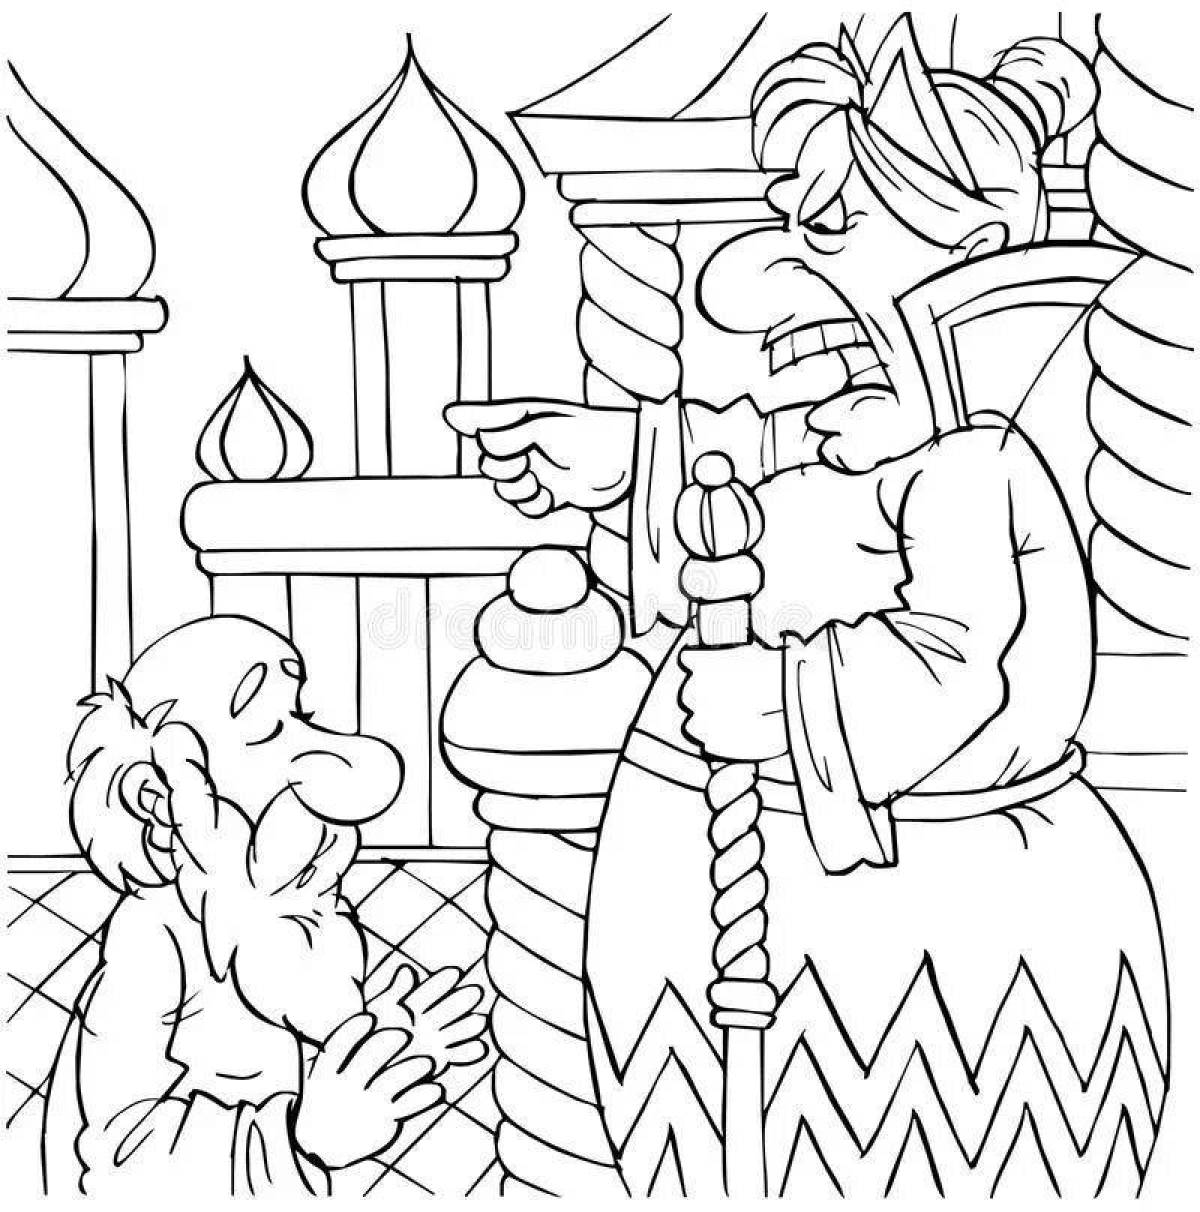 Lovely goldfish story coloring page